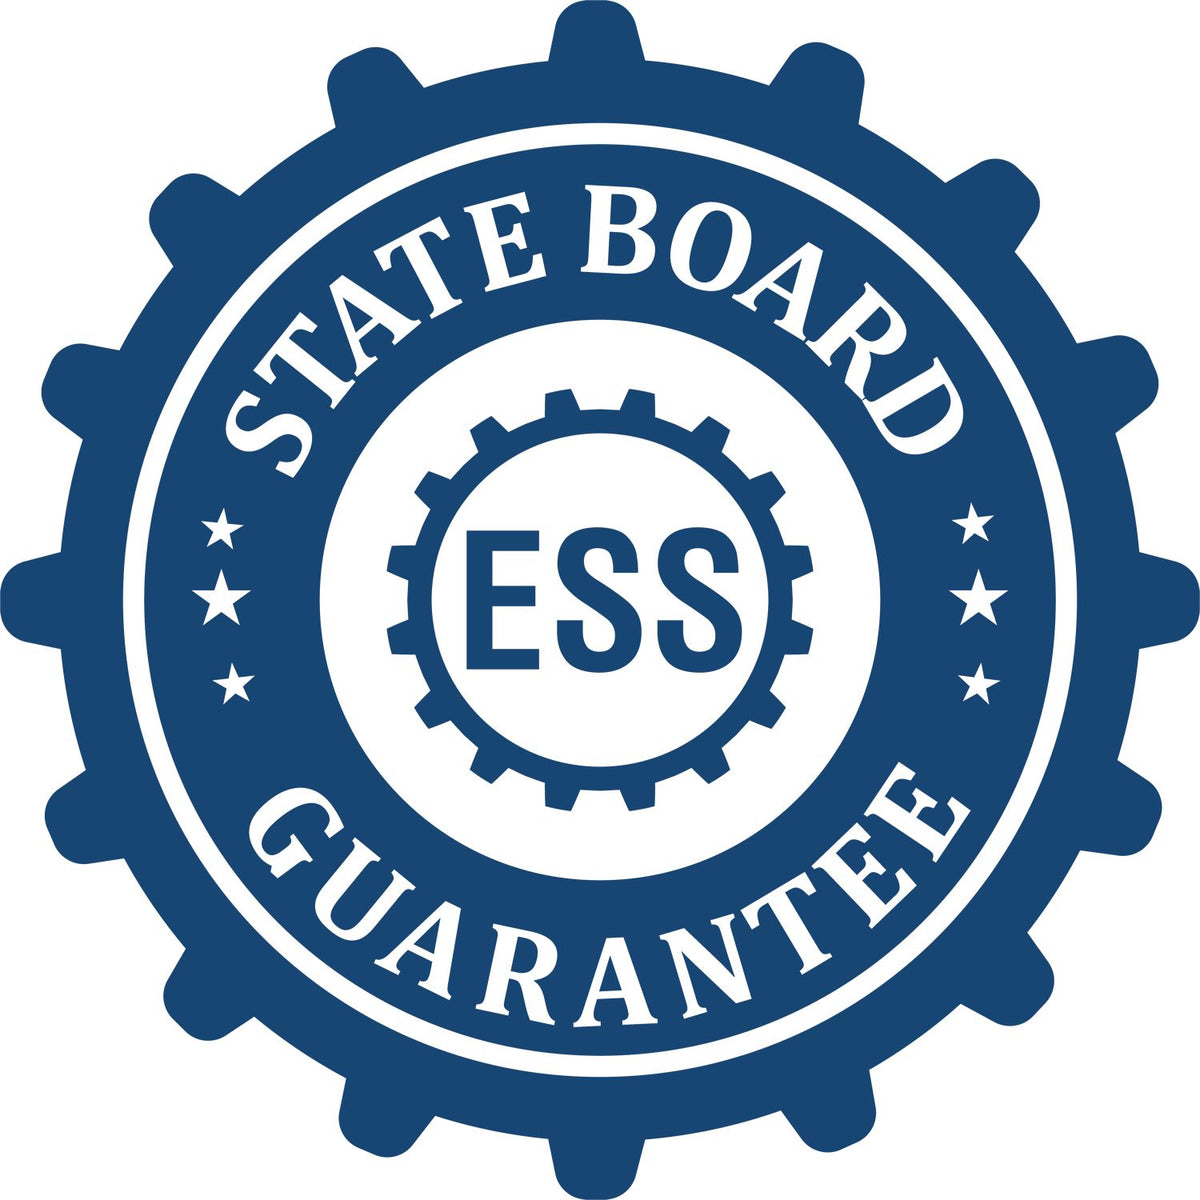 An emblem in a gear shape illustrating a state board guarantee for the Gift Maine Architect Seal